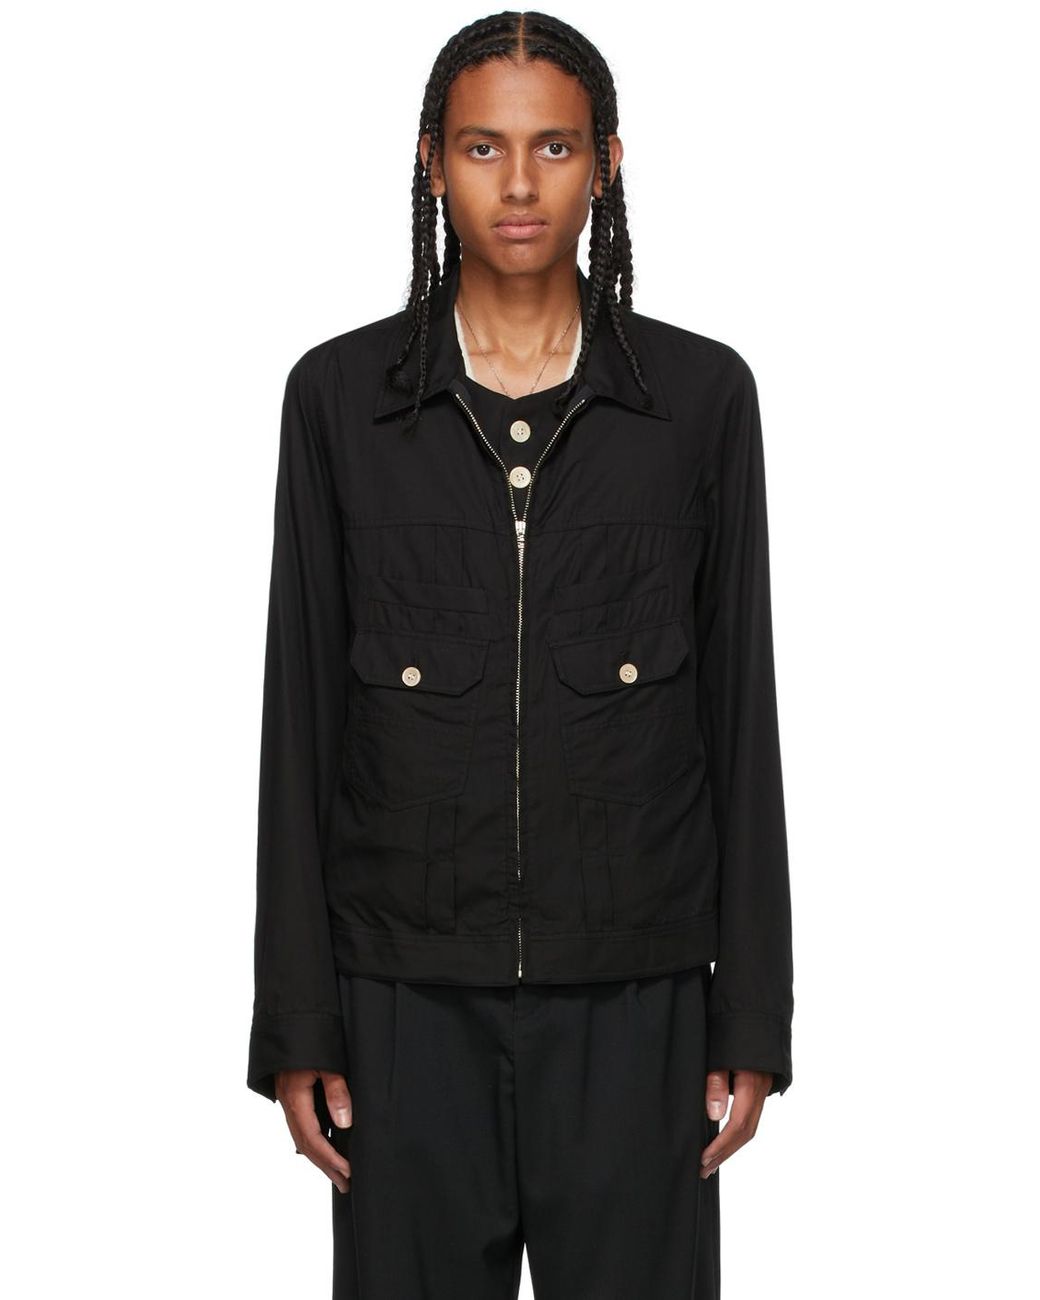 BED j.w. FORD Cotton Ensemble Zip Jacket in Black for Men | Lyst